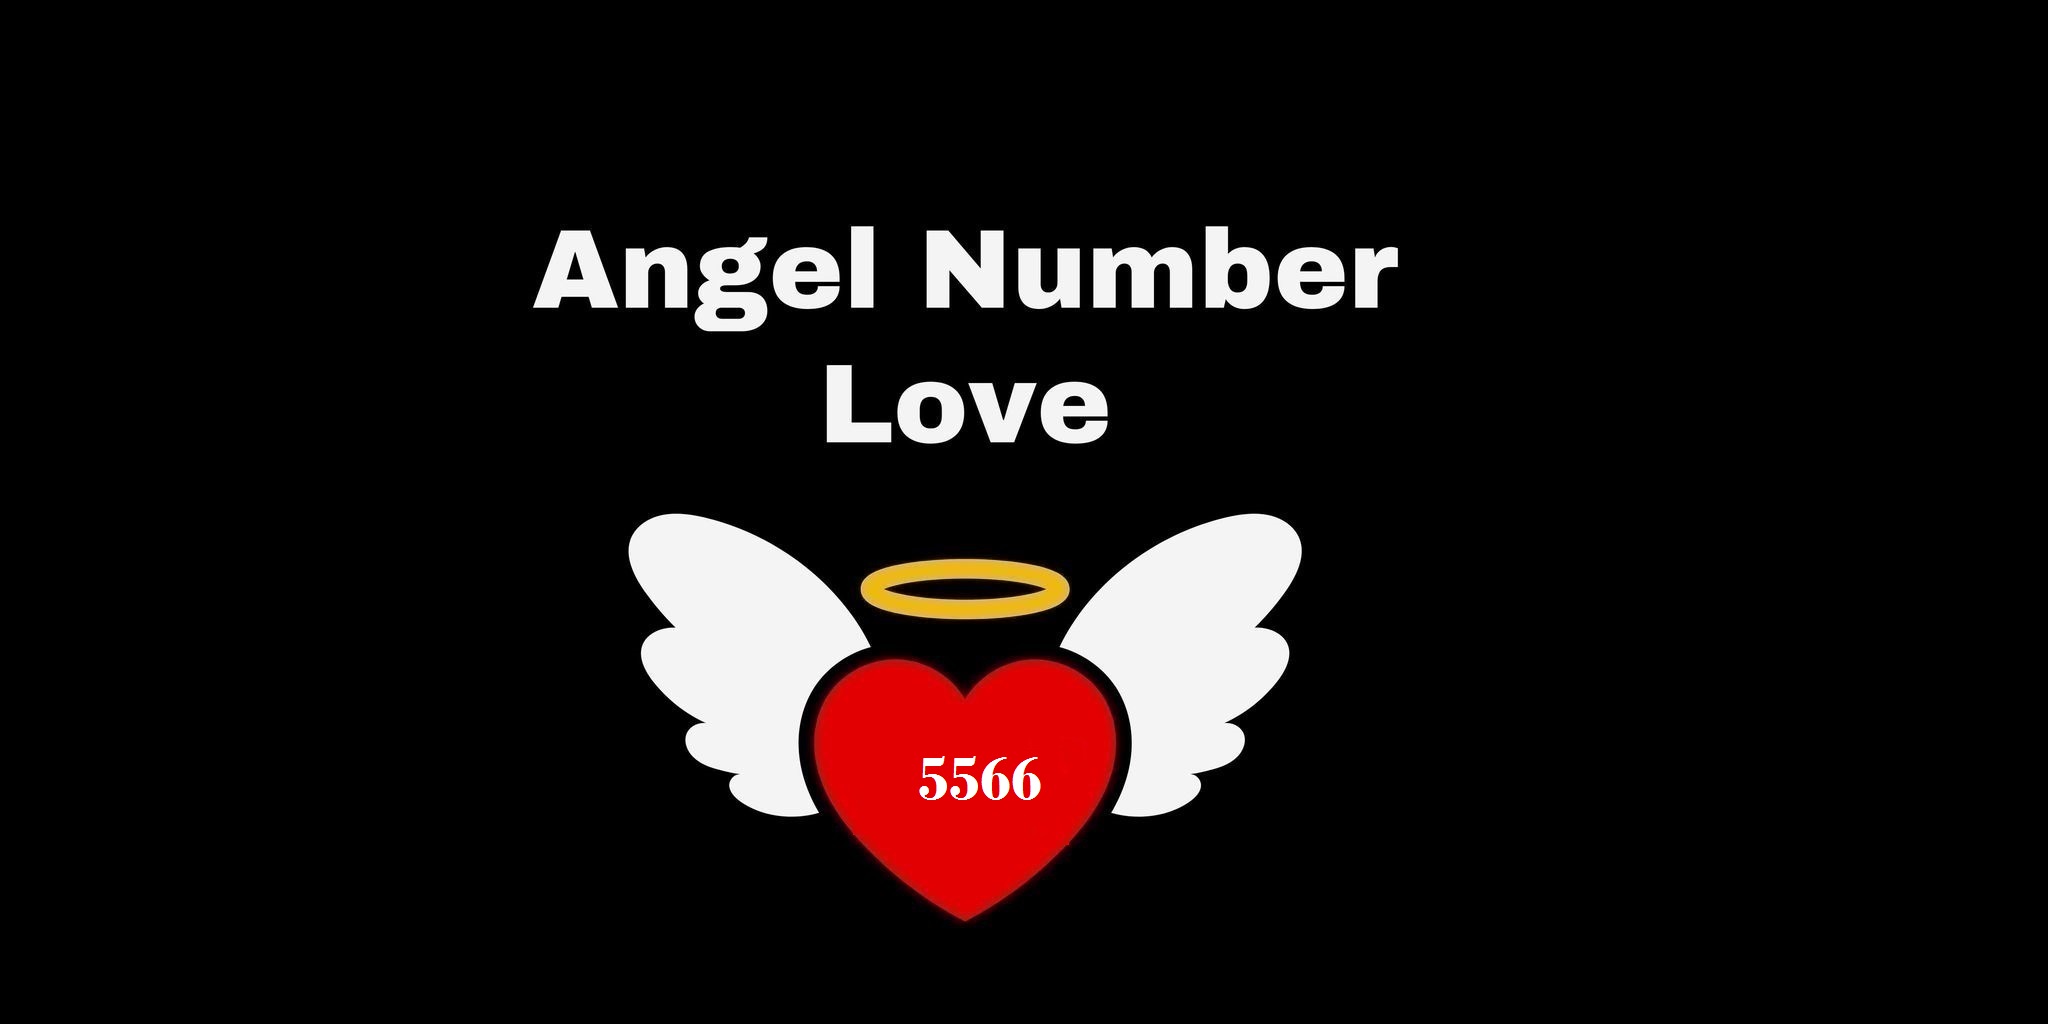 5566 Angel Number Meaning In Love